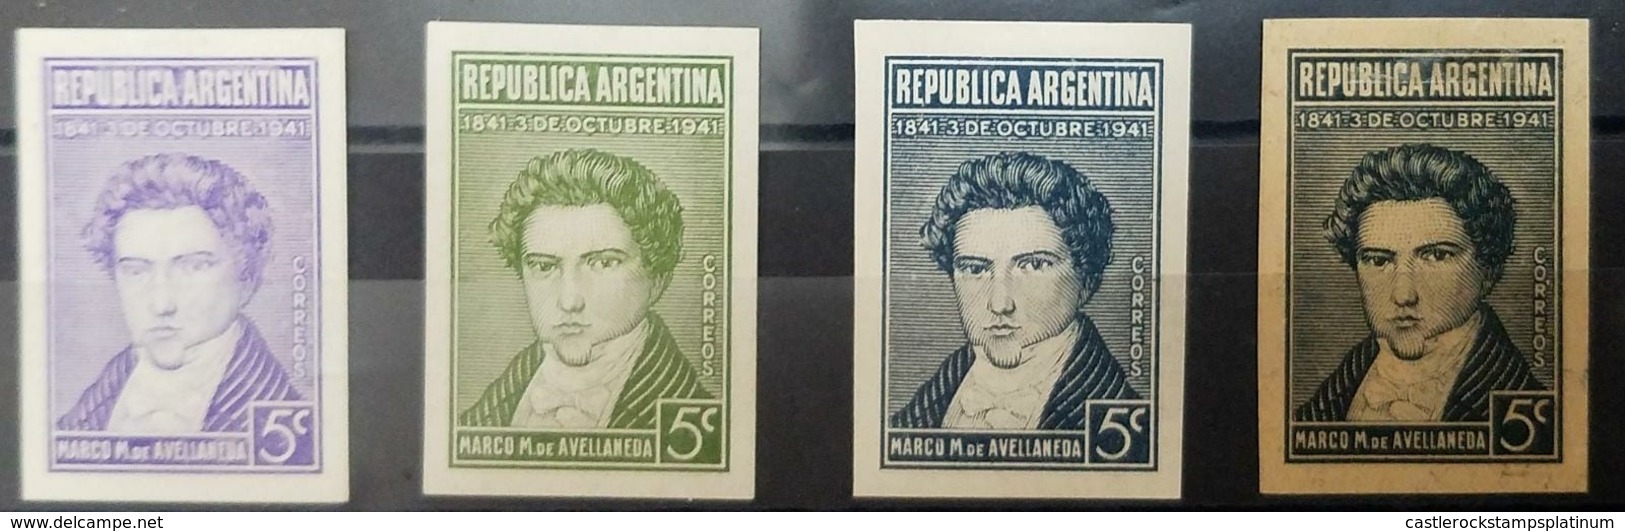 O) 1941 ARGENTINA. PROOF, MARCO M. DE AVELLANEDA -ARMY LEADER AND MARTYR SCT 476 5c, SET MNH - Nuovi